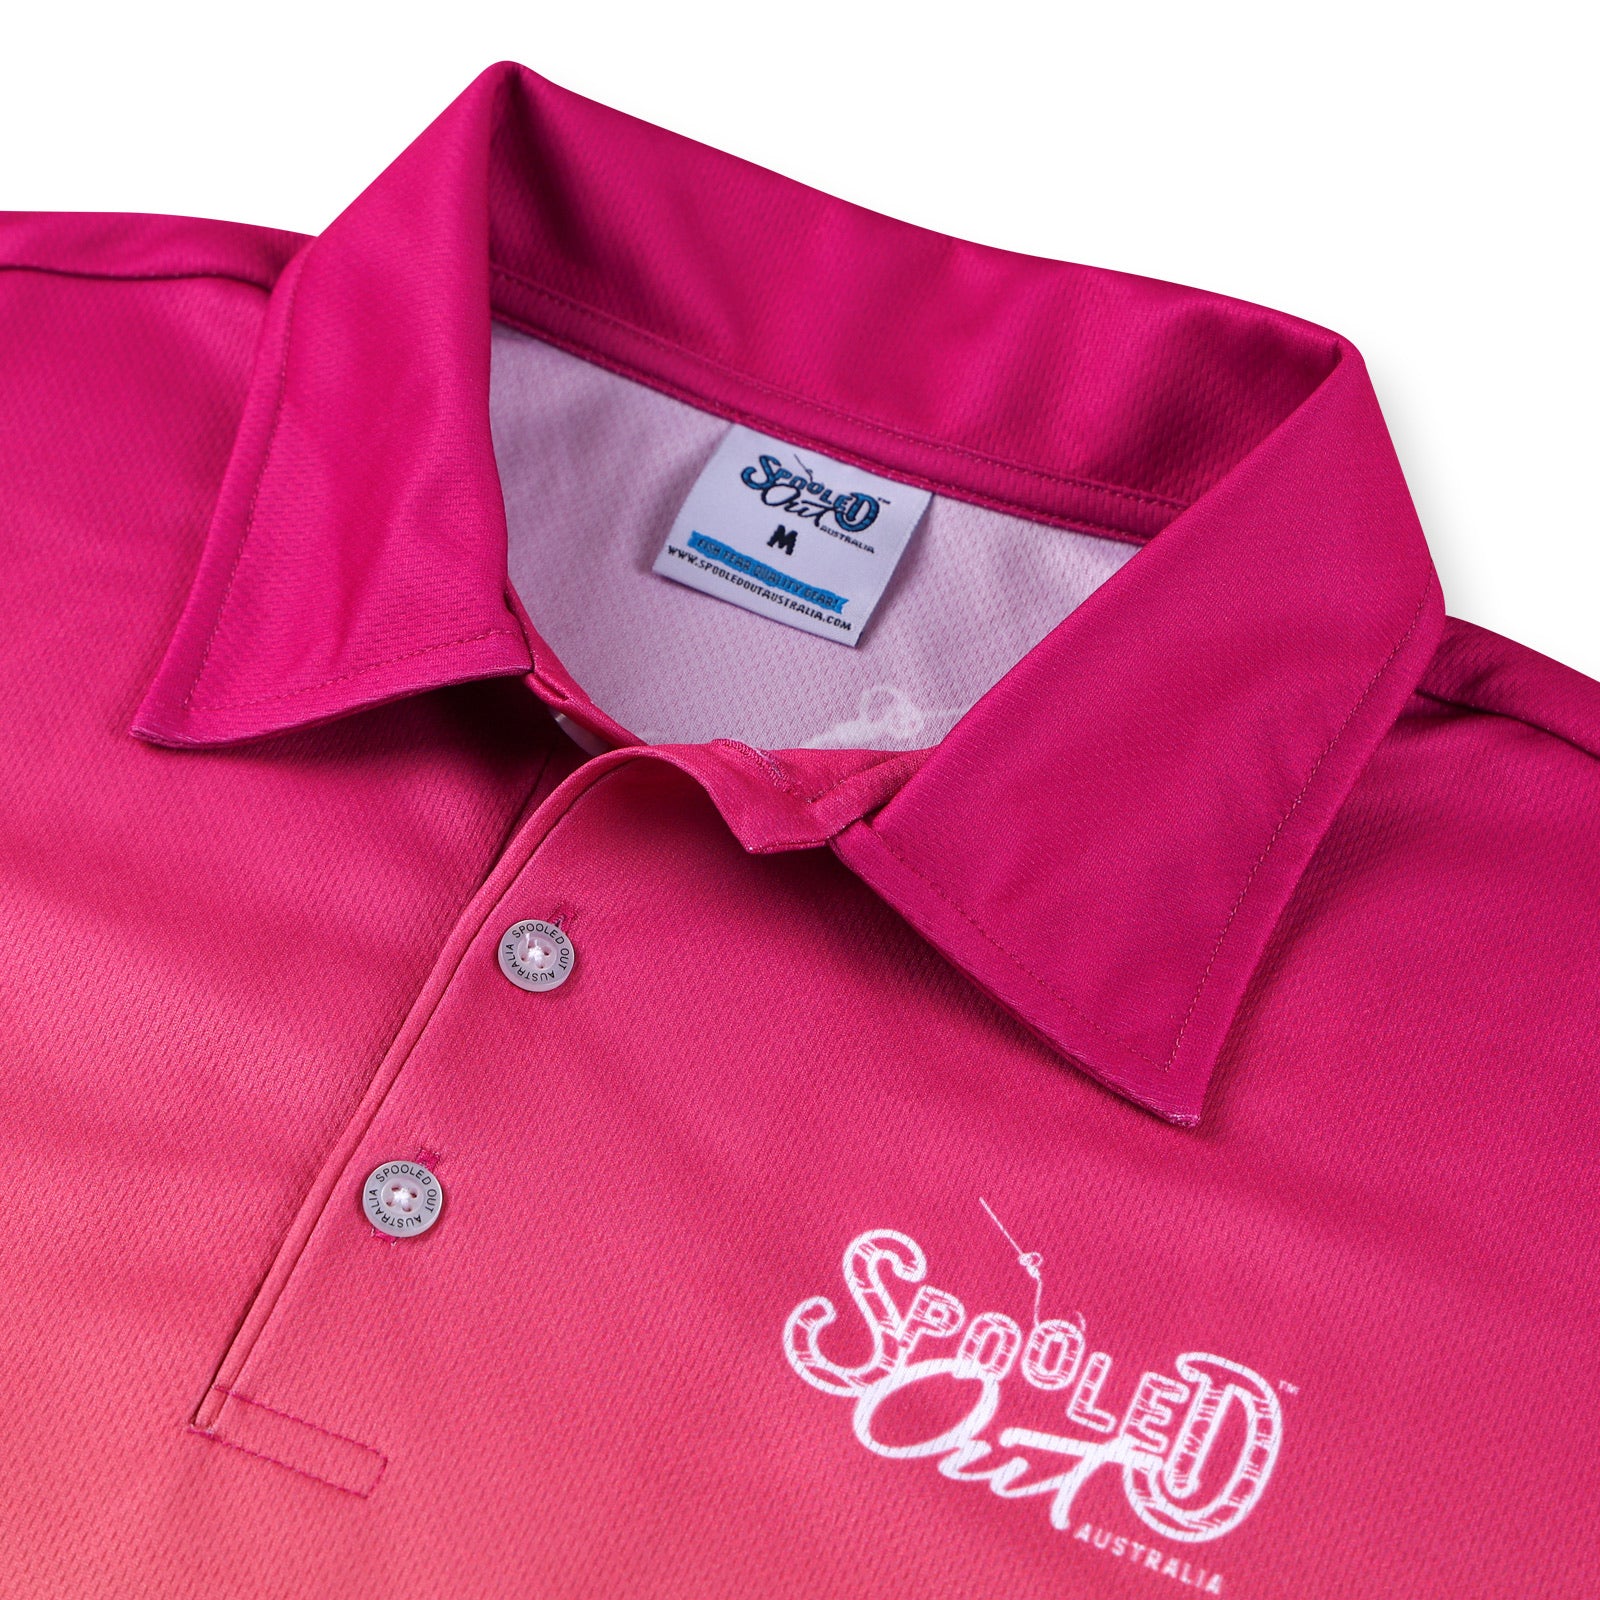 Close up of quality fishing shirt colar with custom buttons and high quality stitching